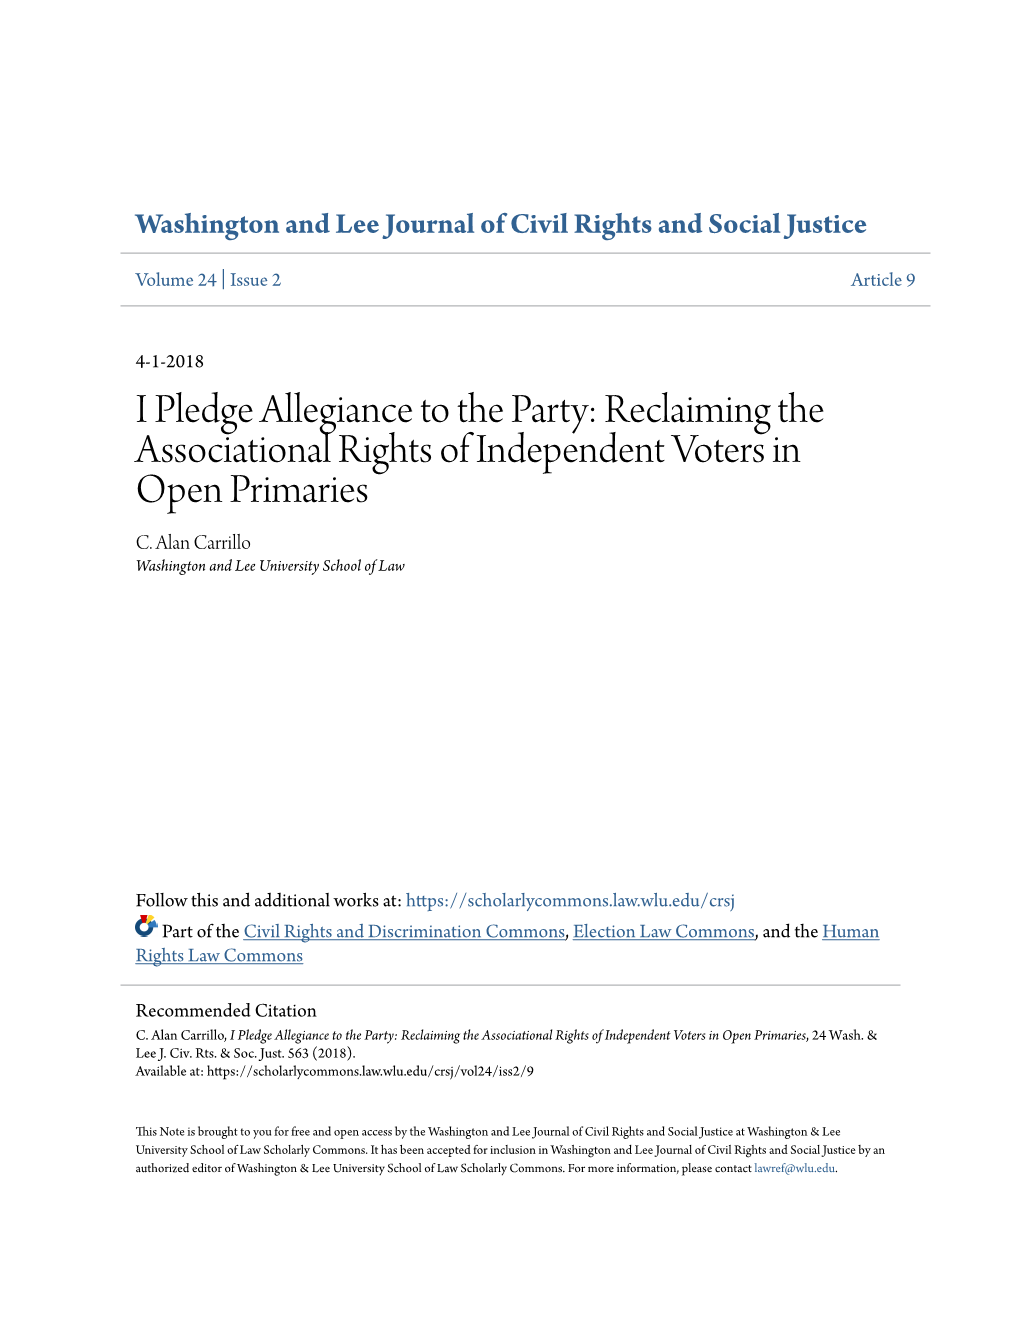 Reclaiming the Associational Rights of Independent Voters in Open Primaries C